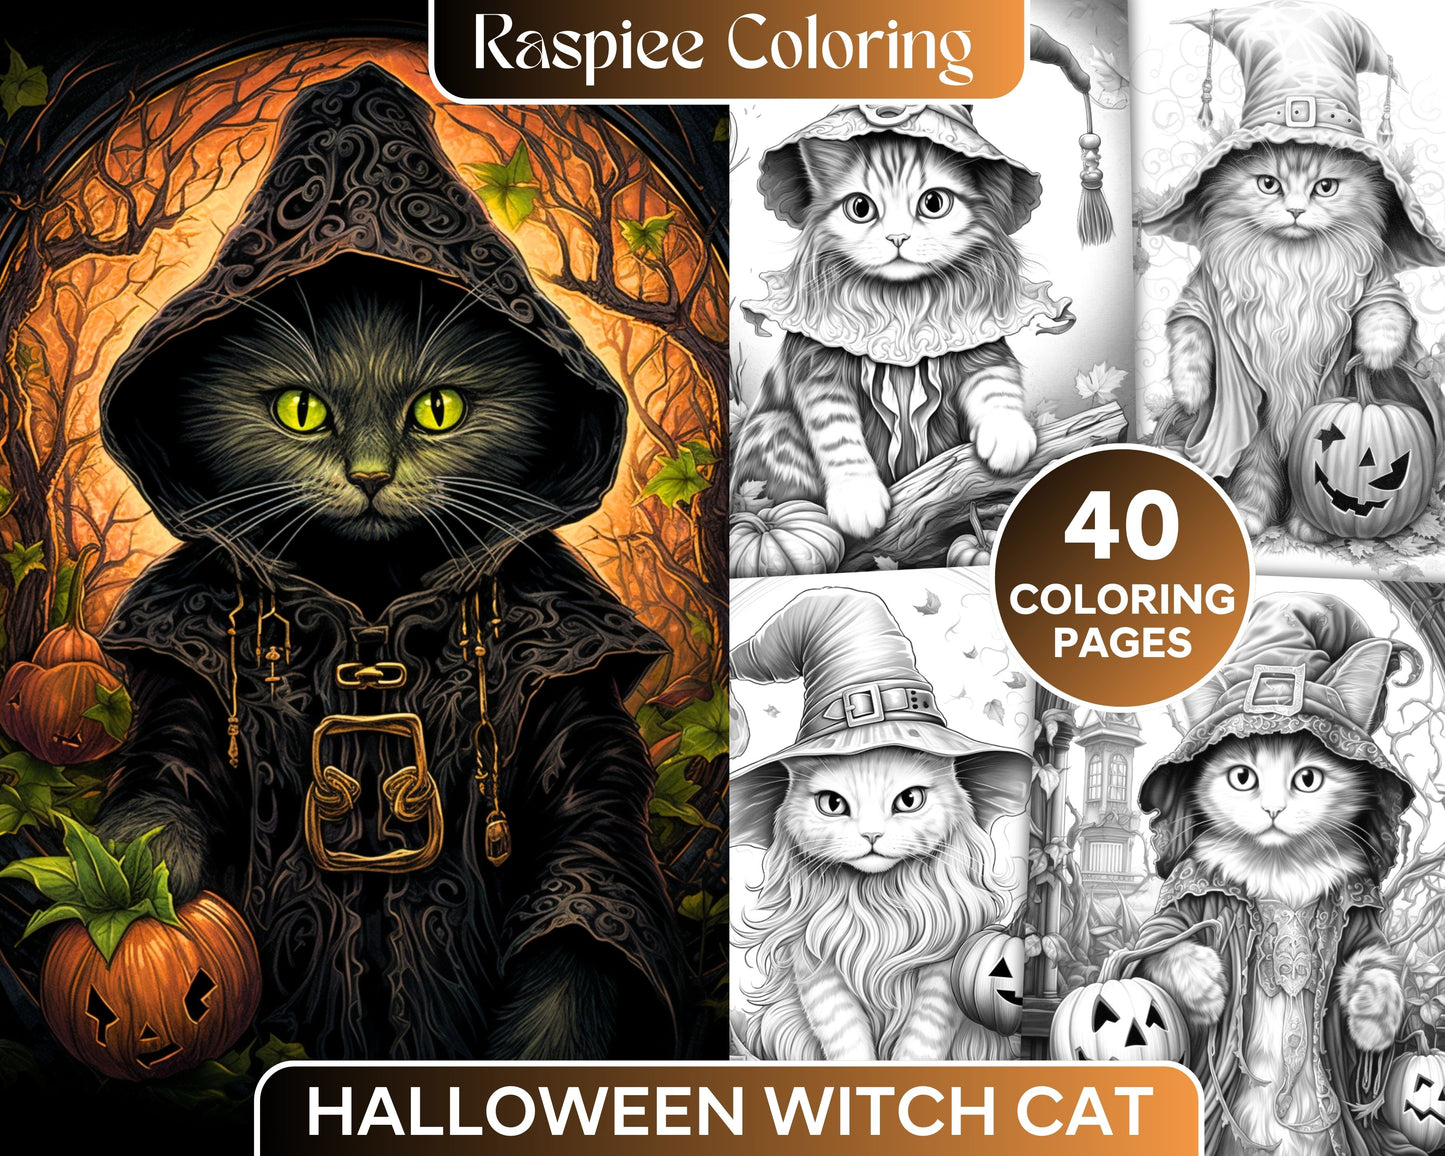 Halloween Witch Cat Coloring Page, Printable Grayscale Coloring Sheet, Adult Coloring Activity, DIY Halloween Decorations, Witchy Cat Art, Stress-Relief Coloring Page, Intricate Witch Design, Spooky Cat Illustration, Halloween Printable Art, Creative Coloring Page, Halloween Coloring Pages for Adults, Halloween Grayscale Coloring Pages